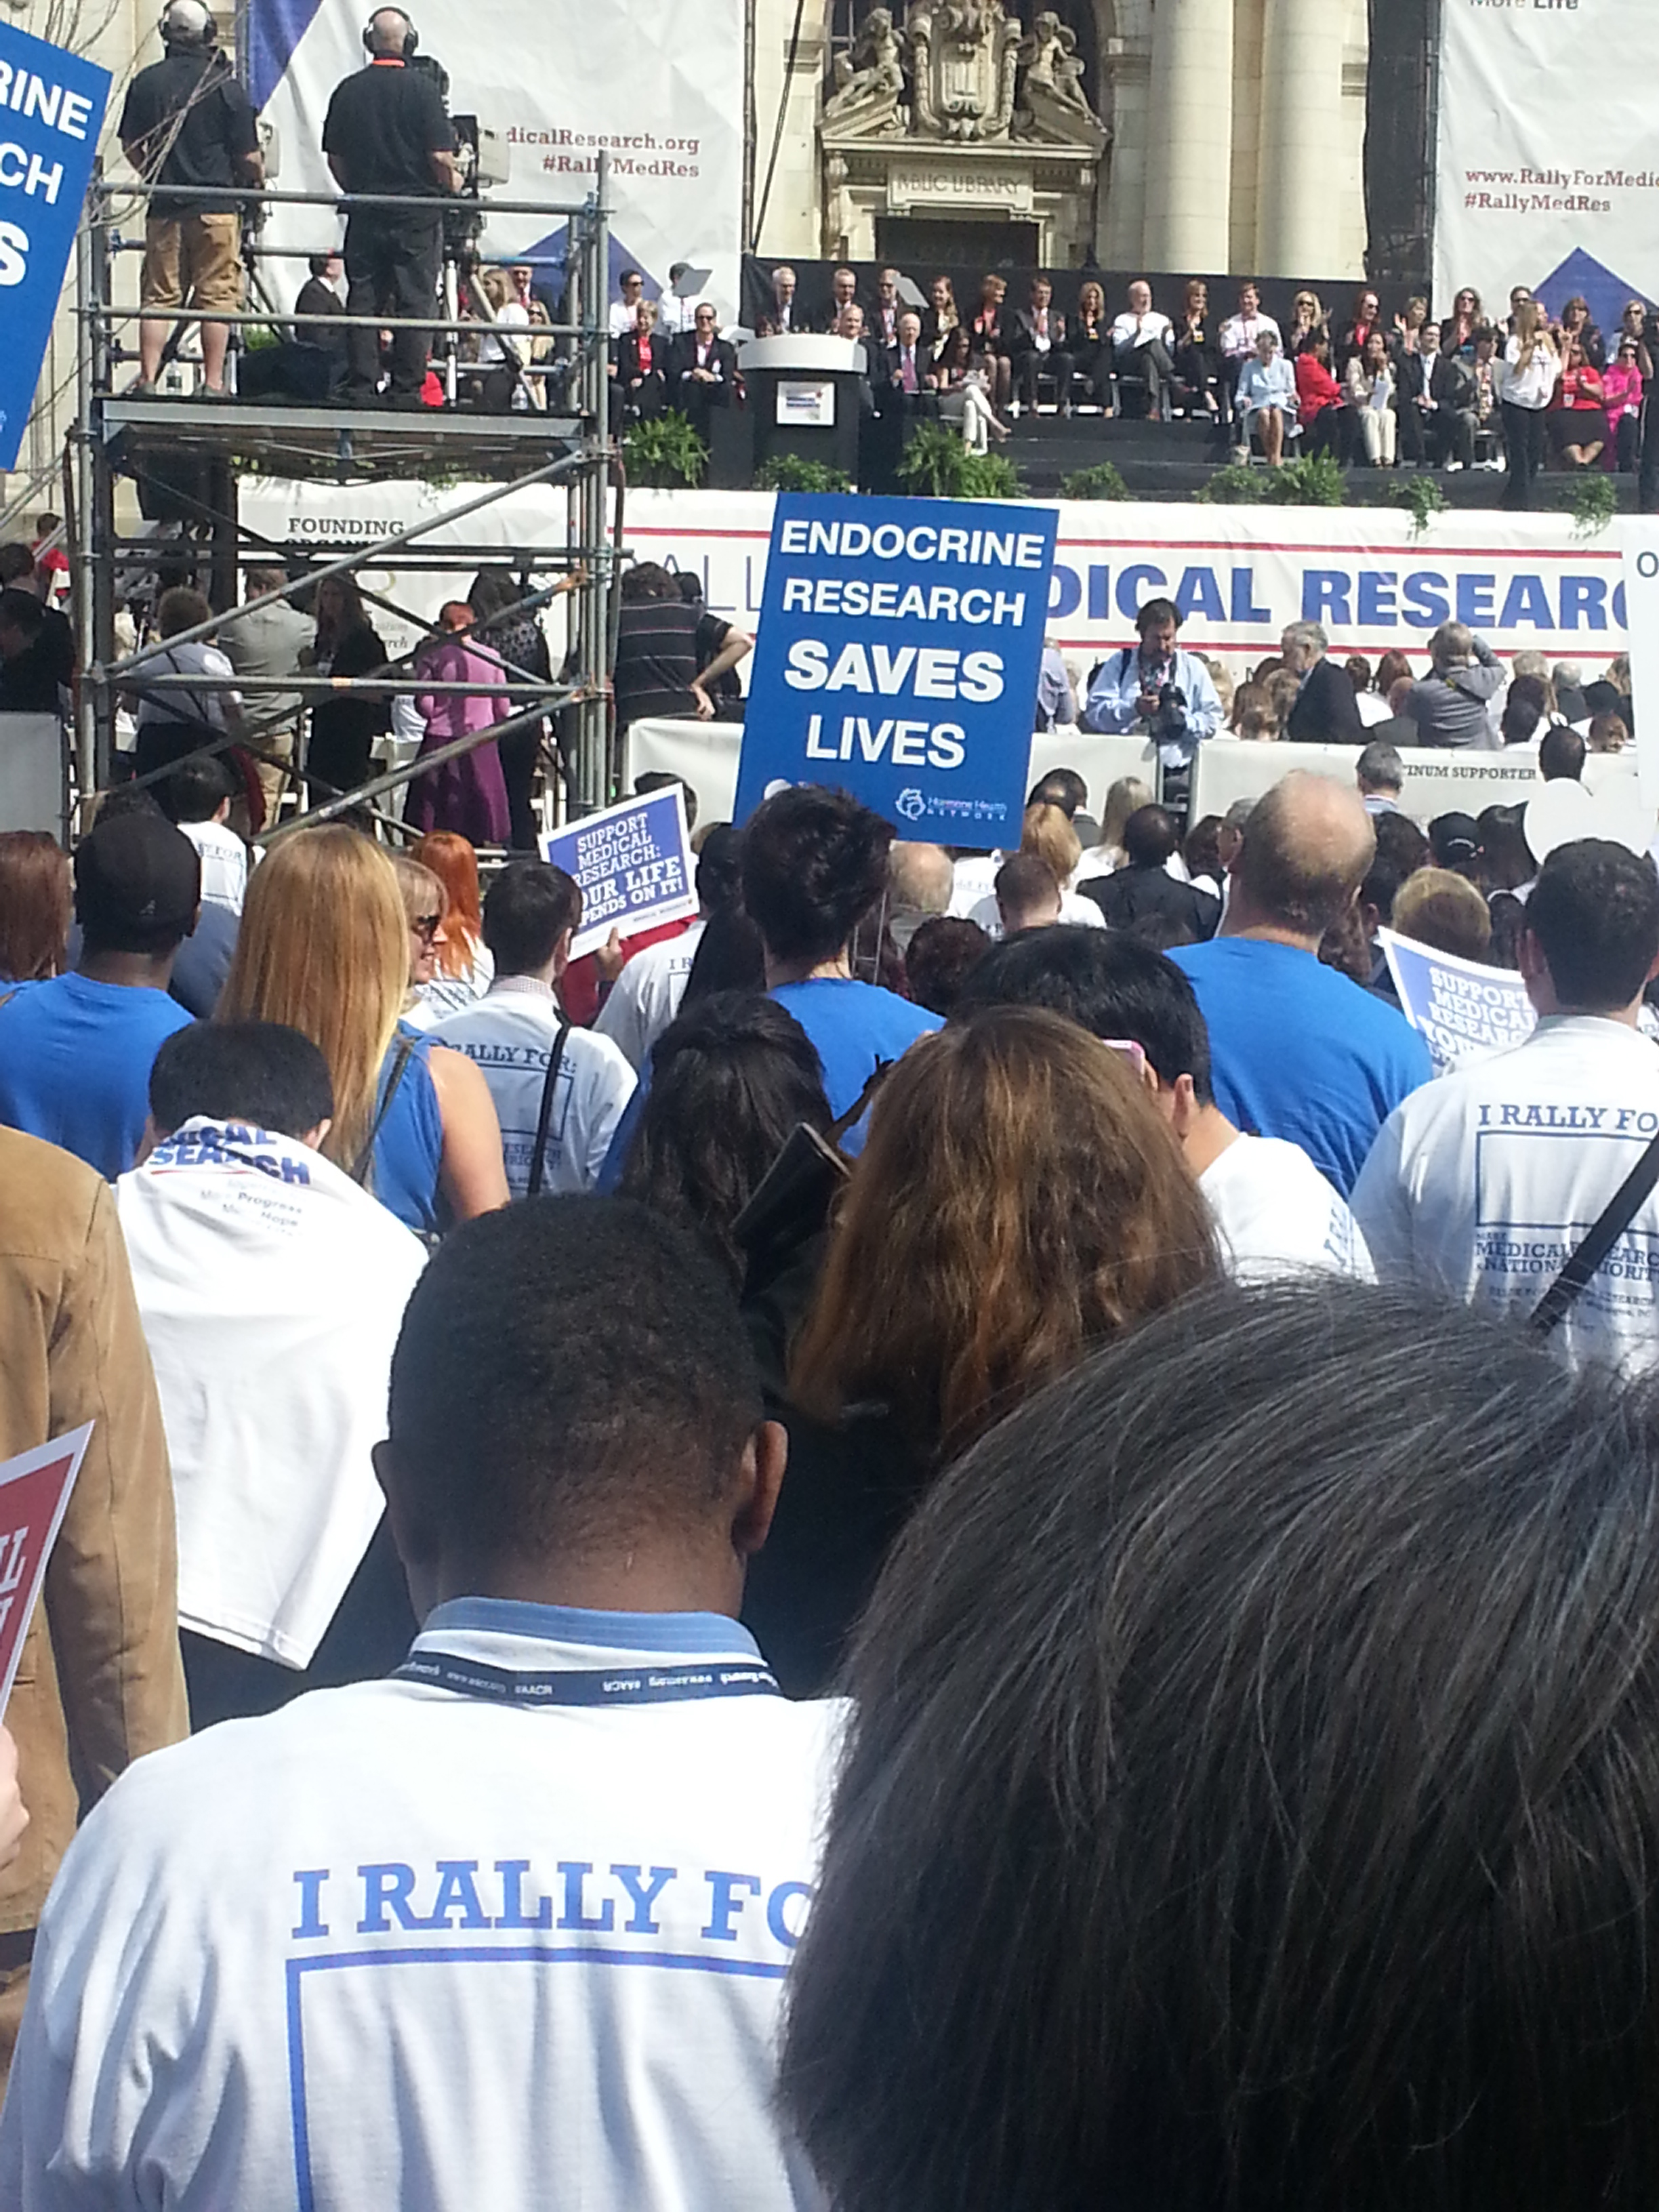 Speakers are getting the crowd excited at AACR’s Rally for Medical Research. Heard chanting: More progress, more hope, more life.